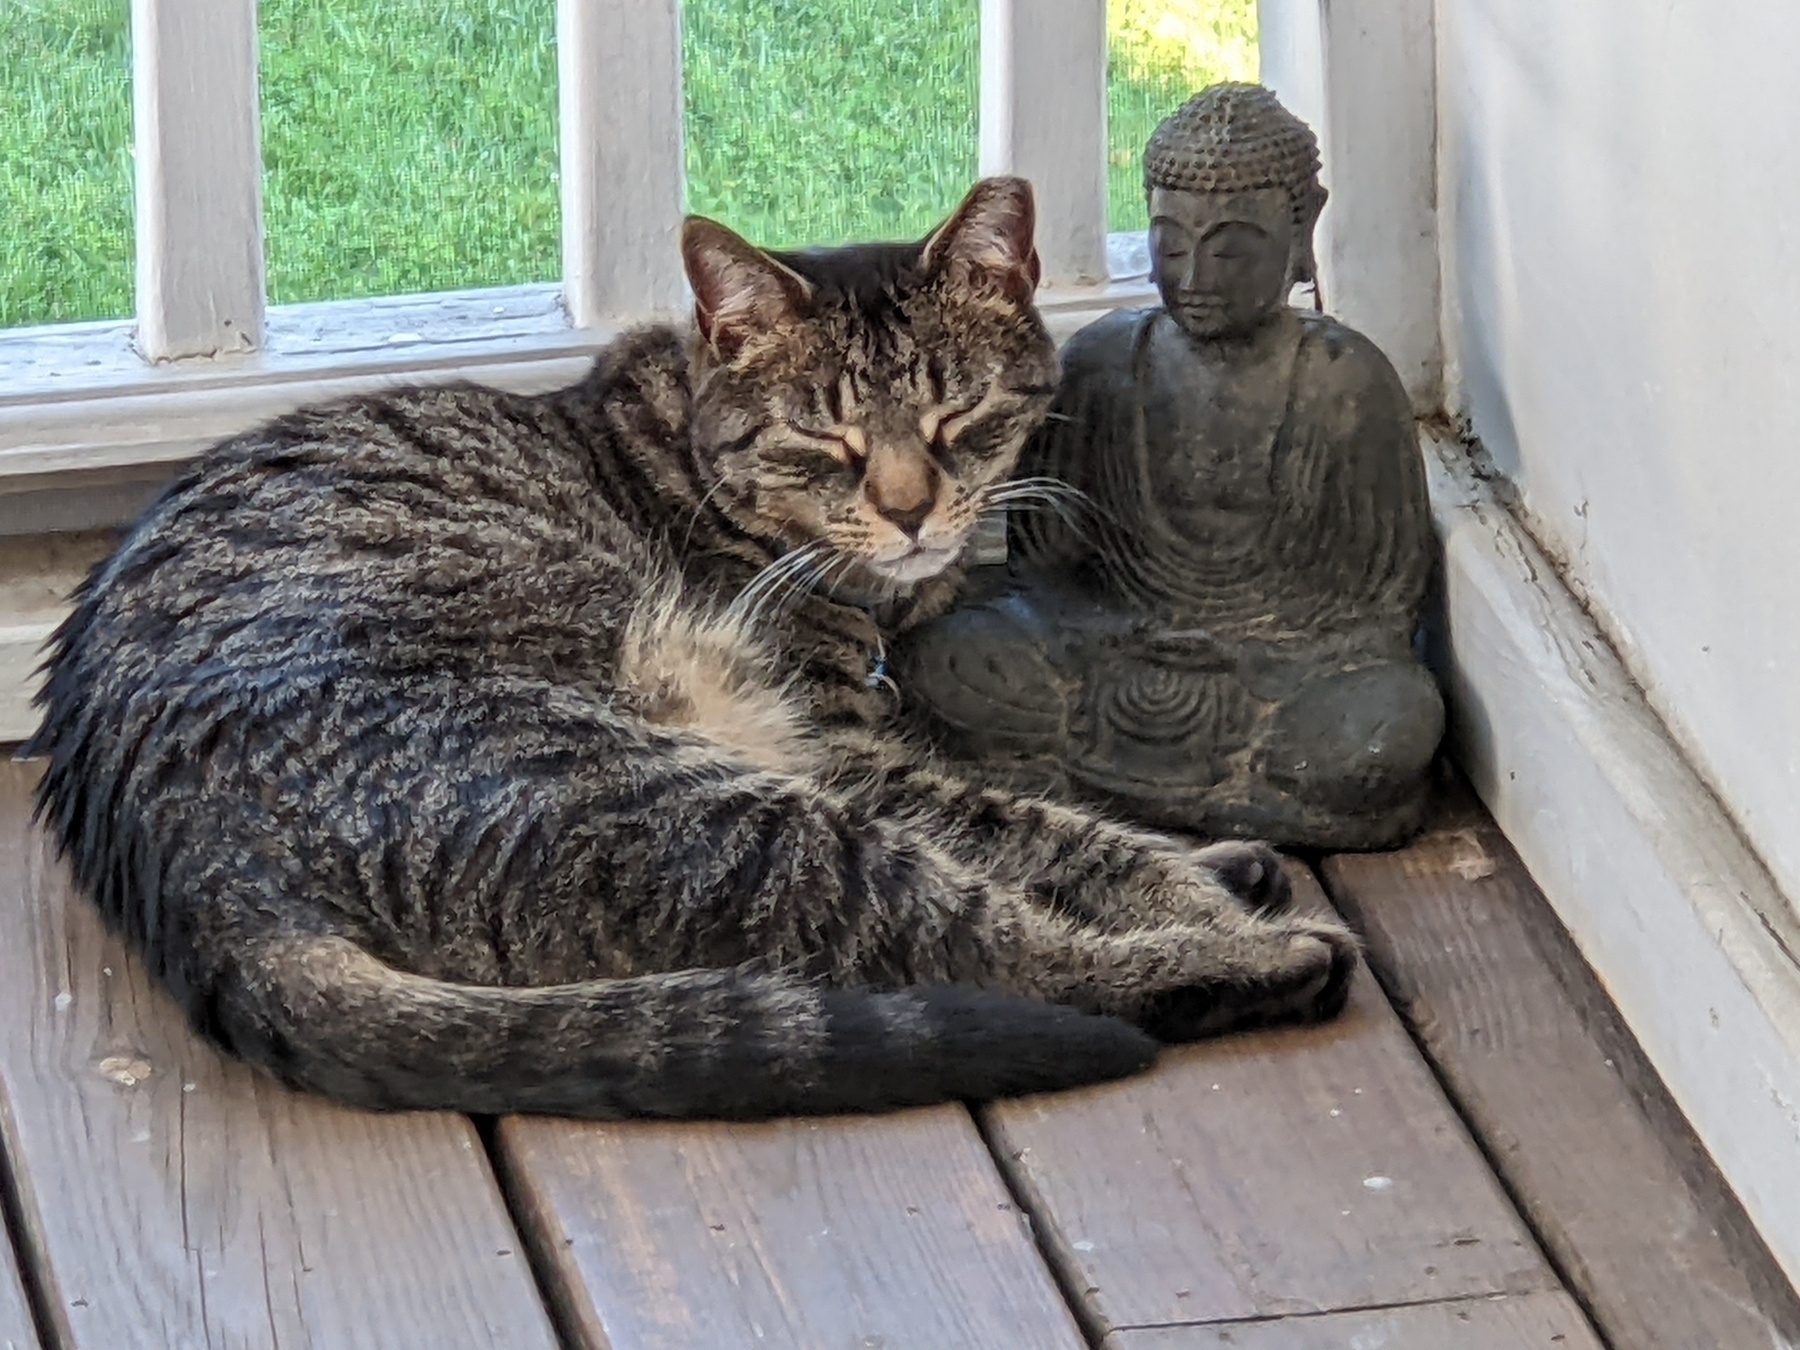 striped cat with closed eyes curled around a garden statue of Buddha, which also has closed eyes 